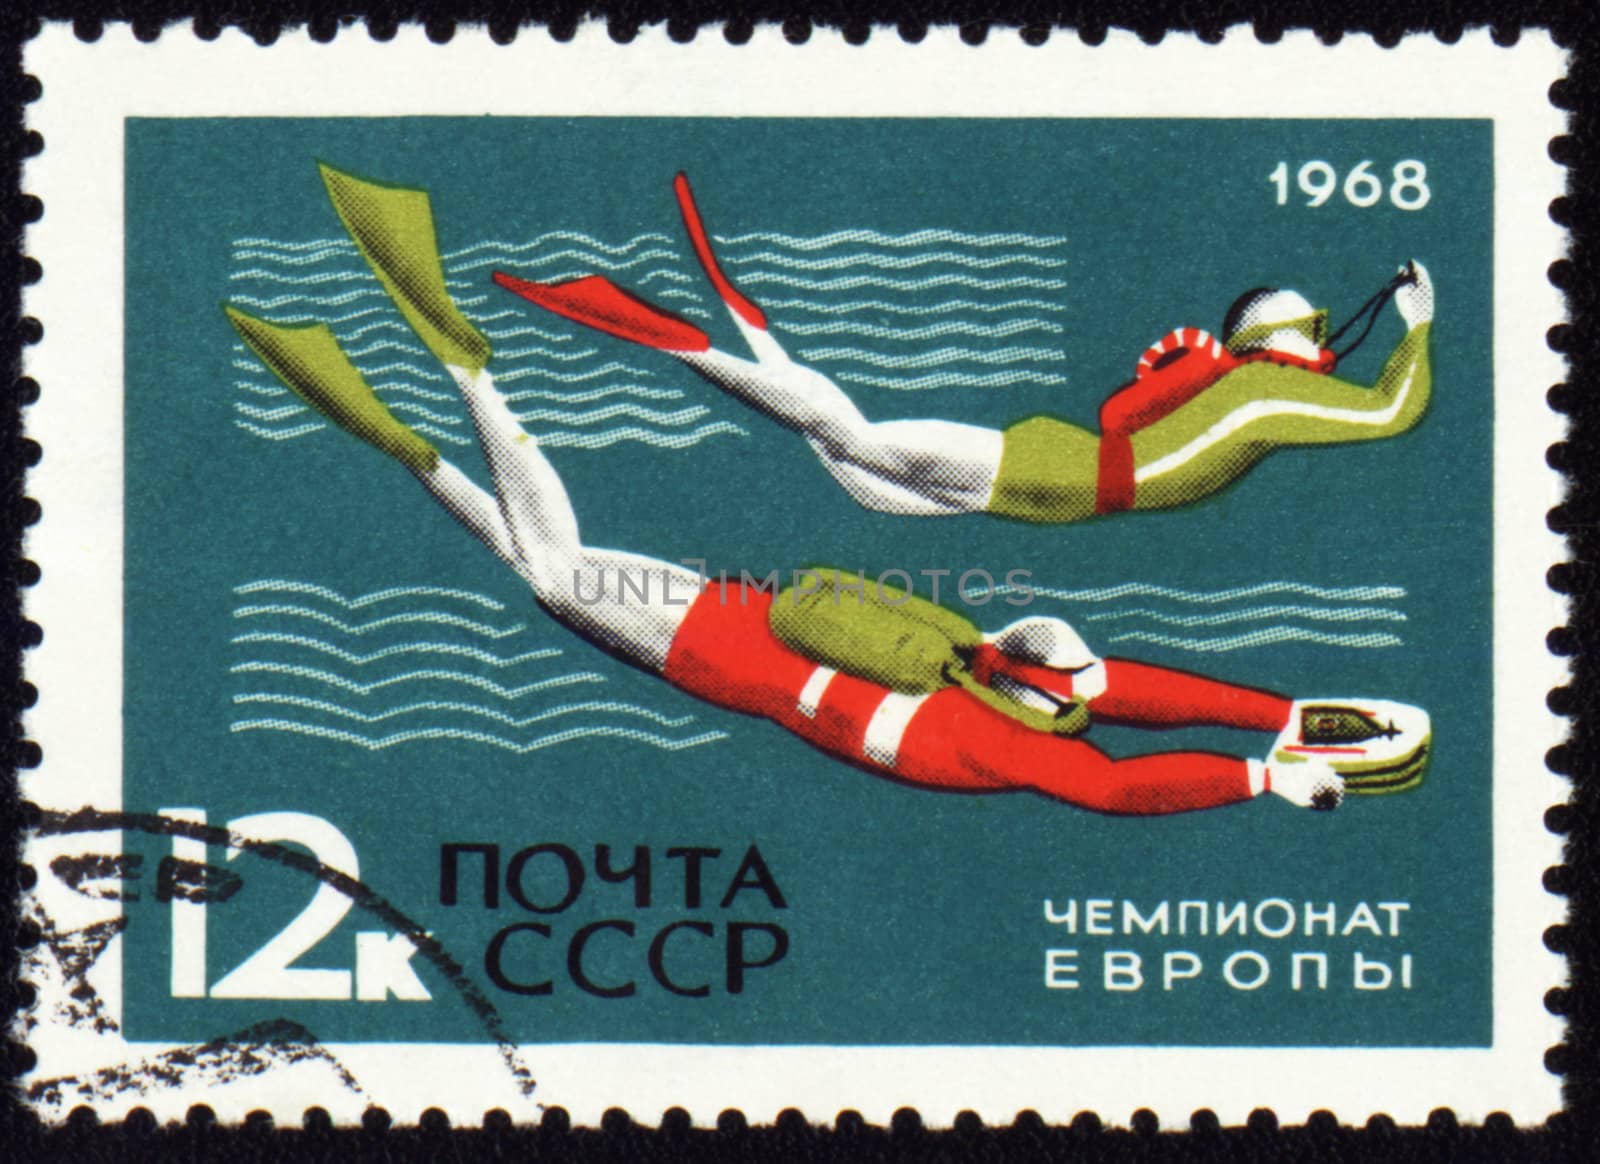 USSR - CIRCA 1968: A stamp printed in USSR devoted to the scuba diving championship in Europe, circa 1968